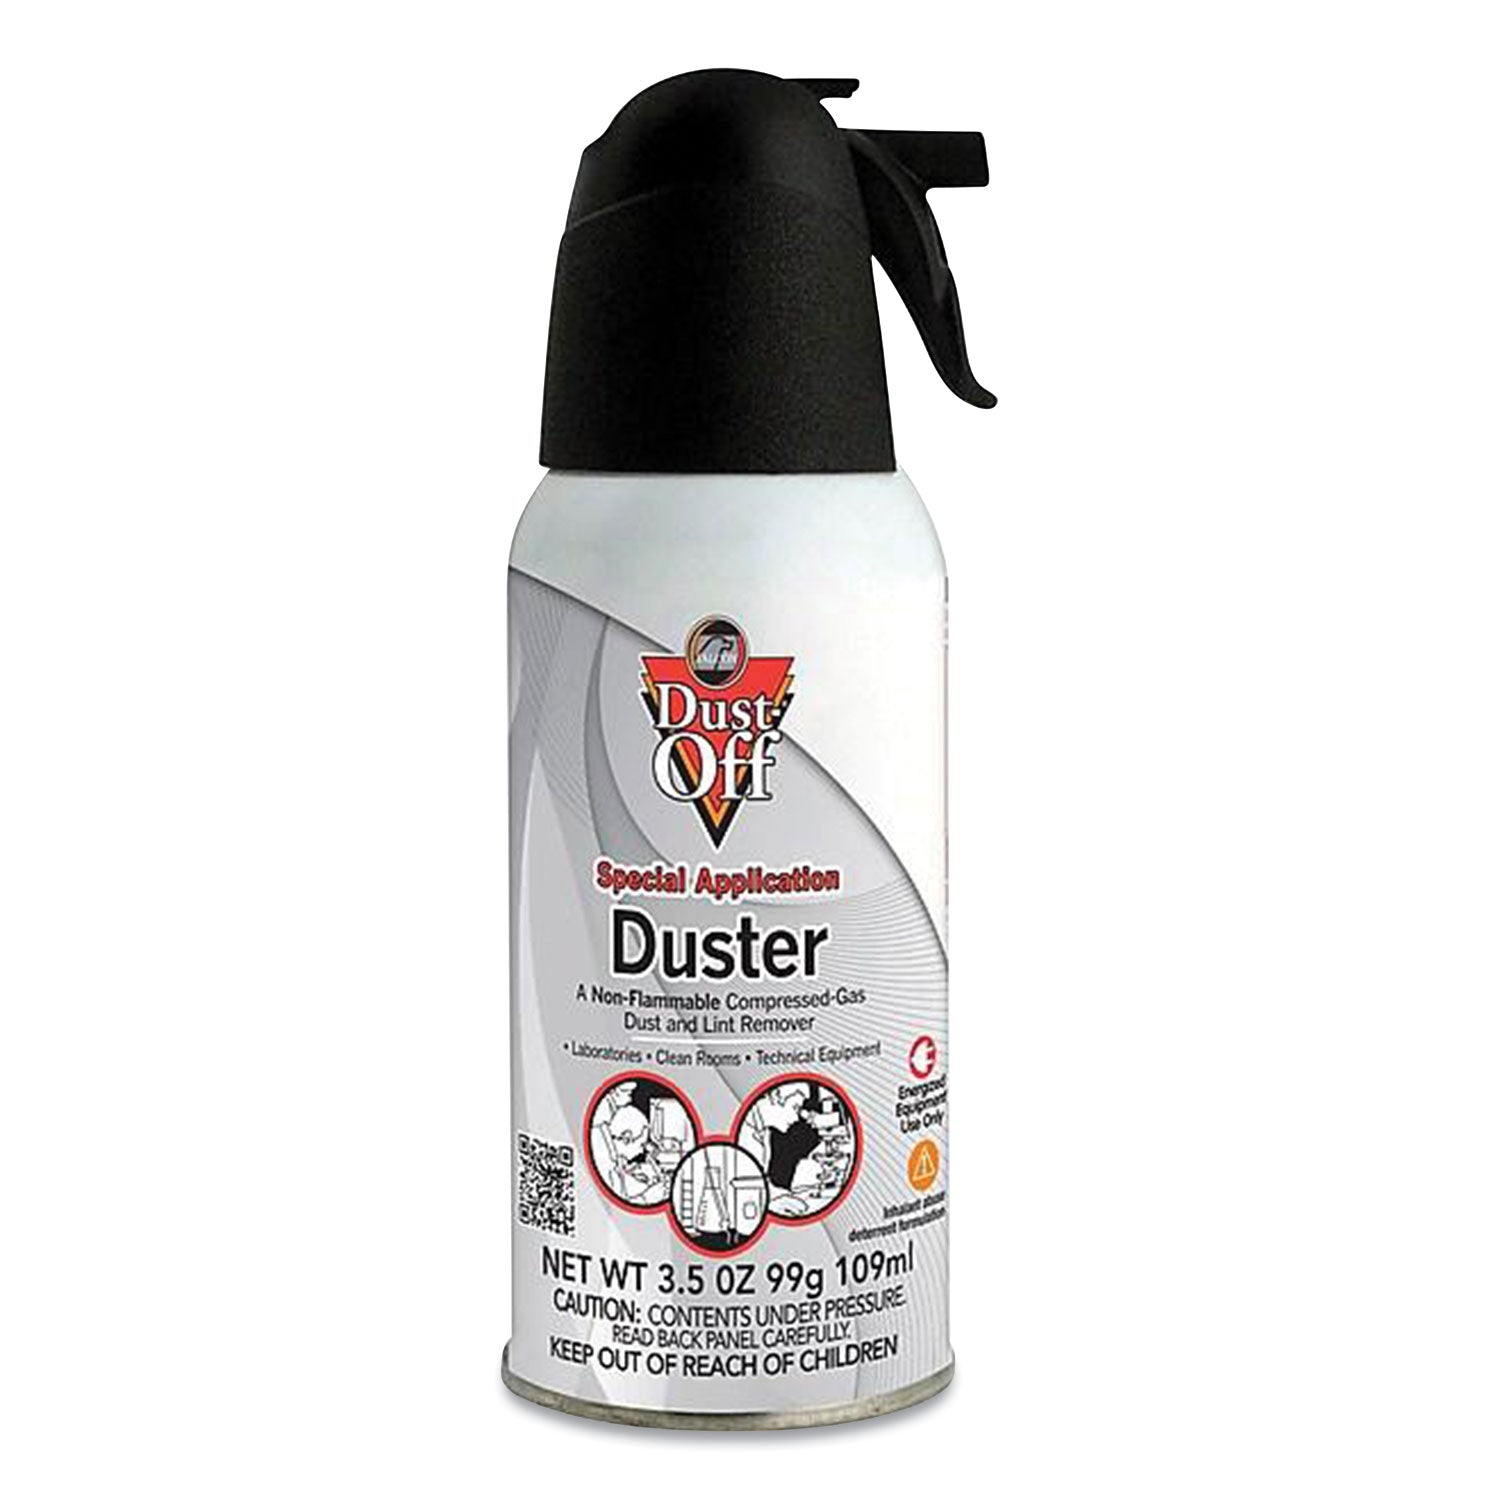 nonflammable-duster-35-oz-can_dofdpnjb - 1